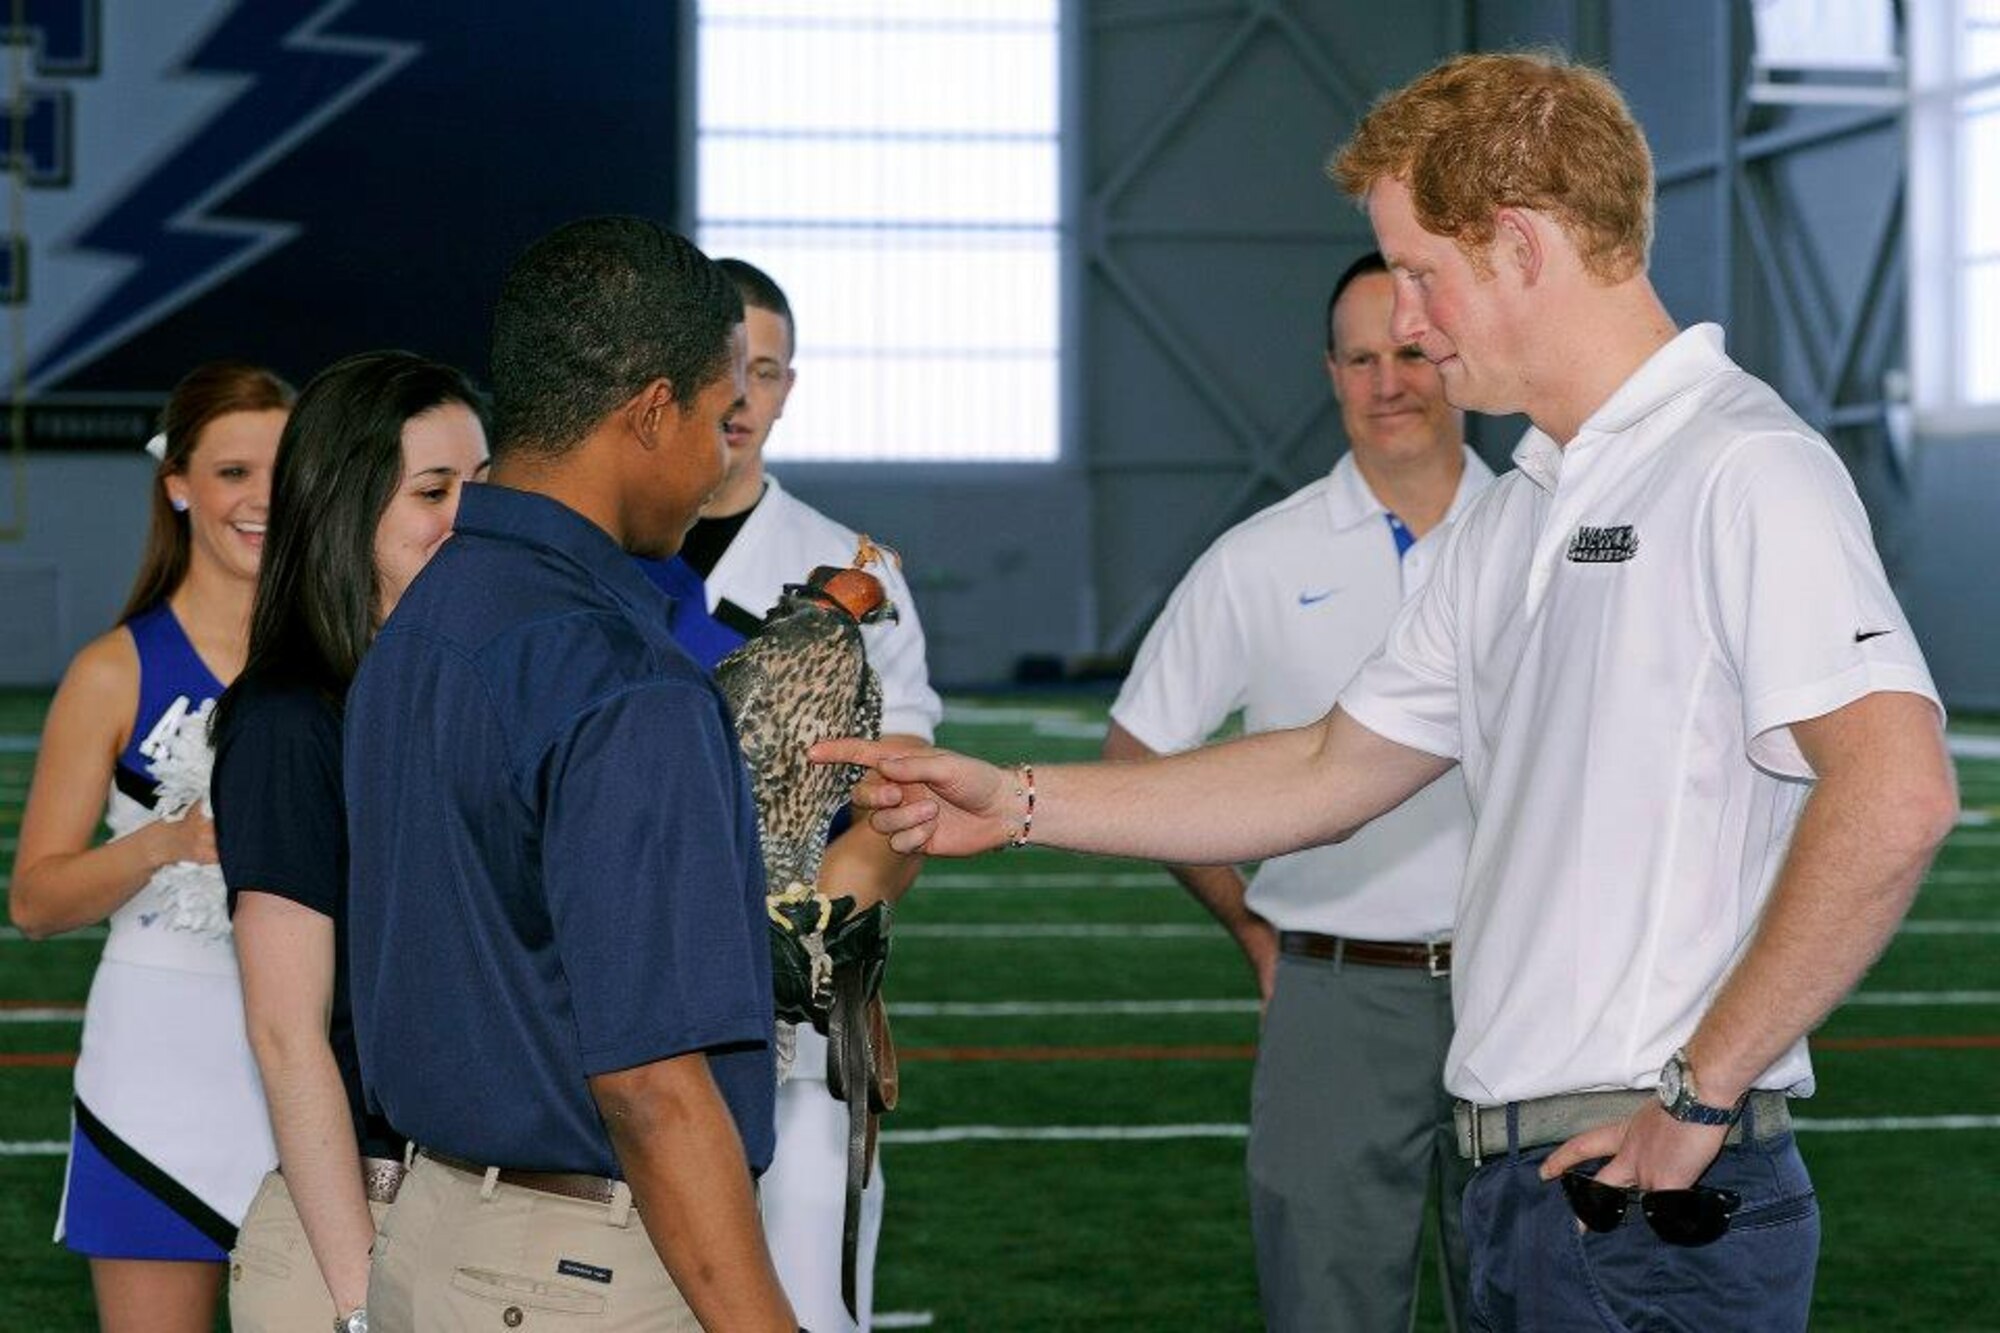 His Royal Highness Prince Henry of Wales meets with cadet falconers during his visit to the Academy May 12. Prince Harry made a stop in Colorado Springs and the Academy during his week-long visit to the United States to raise awareness for Warrior Games, which are taking place here and at the U.S. Olympic Training Center throughout the week. (U.S. Air Force photo/Sarah Chambers)